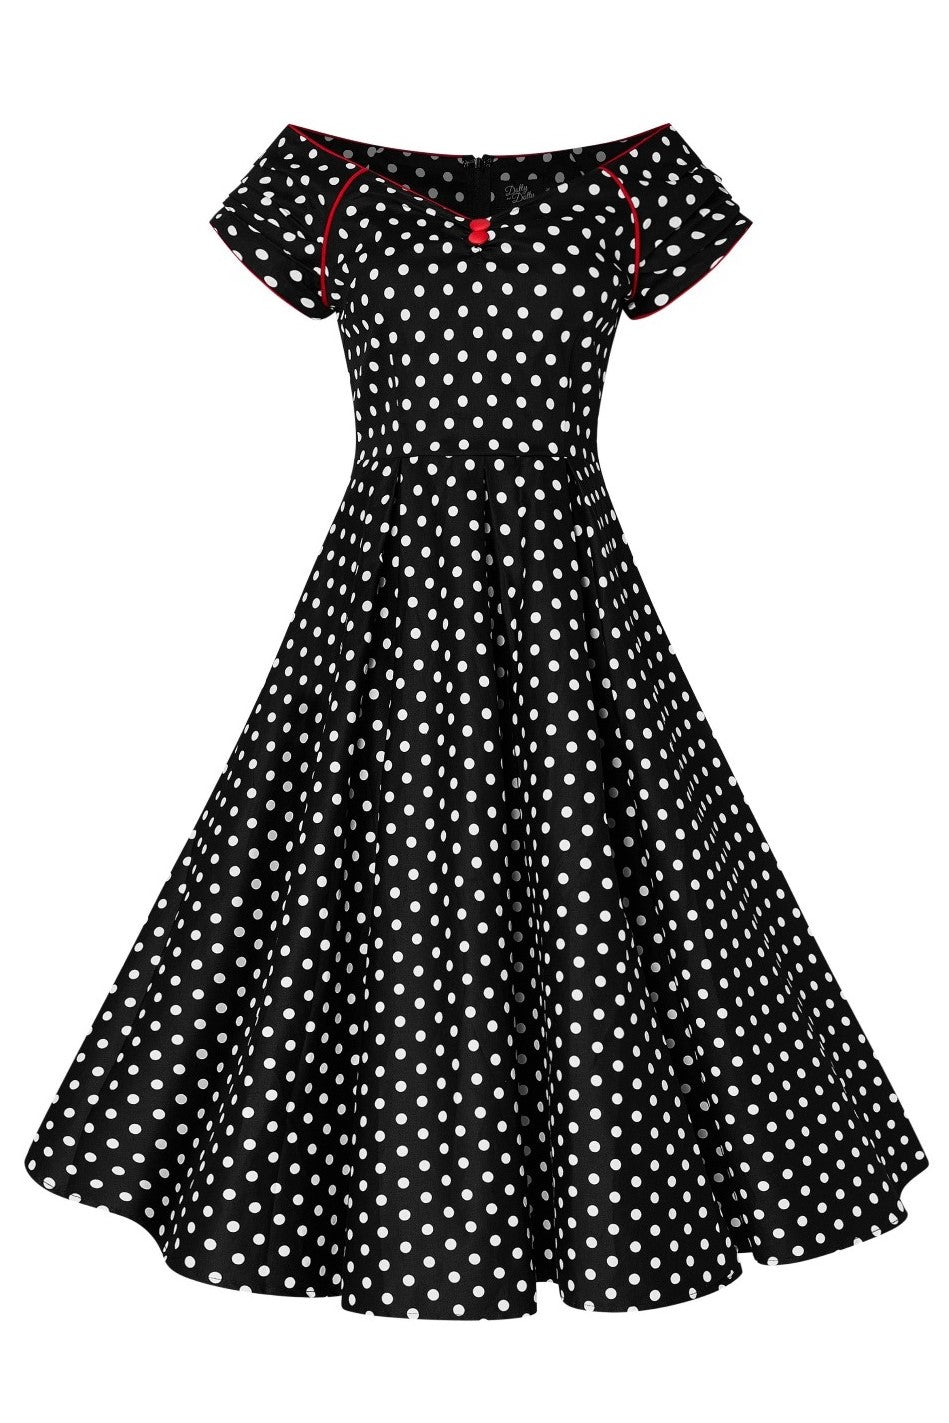 Lily short sleeved swing dress, in black, with white polka dots, front view